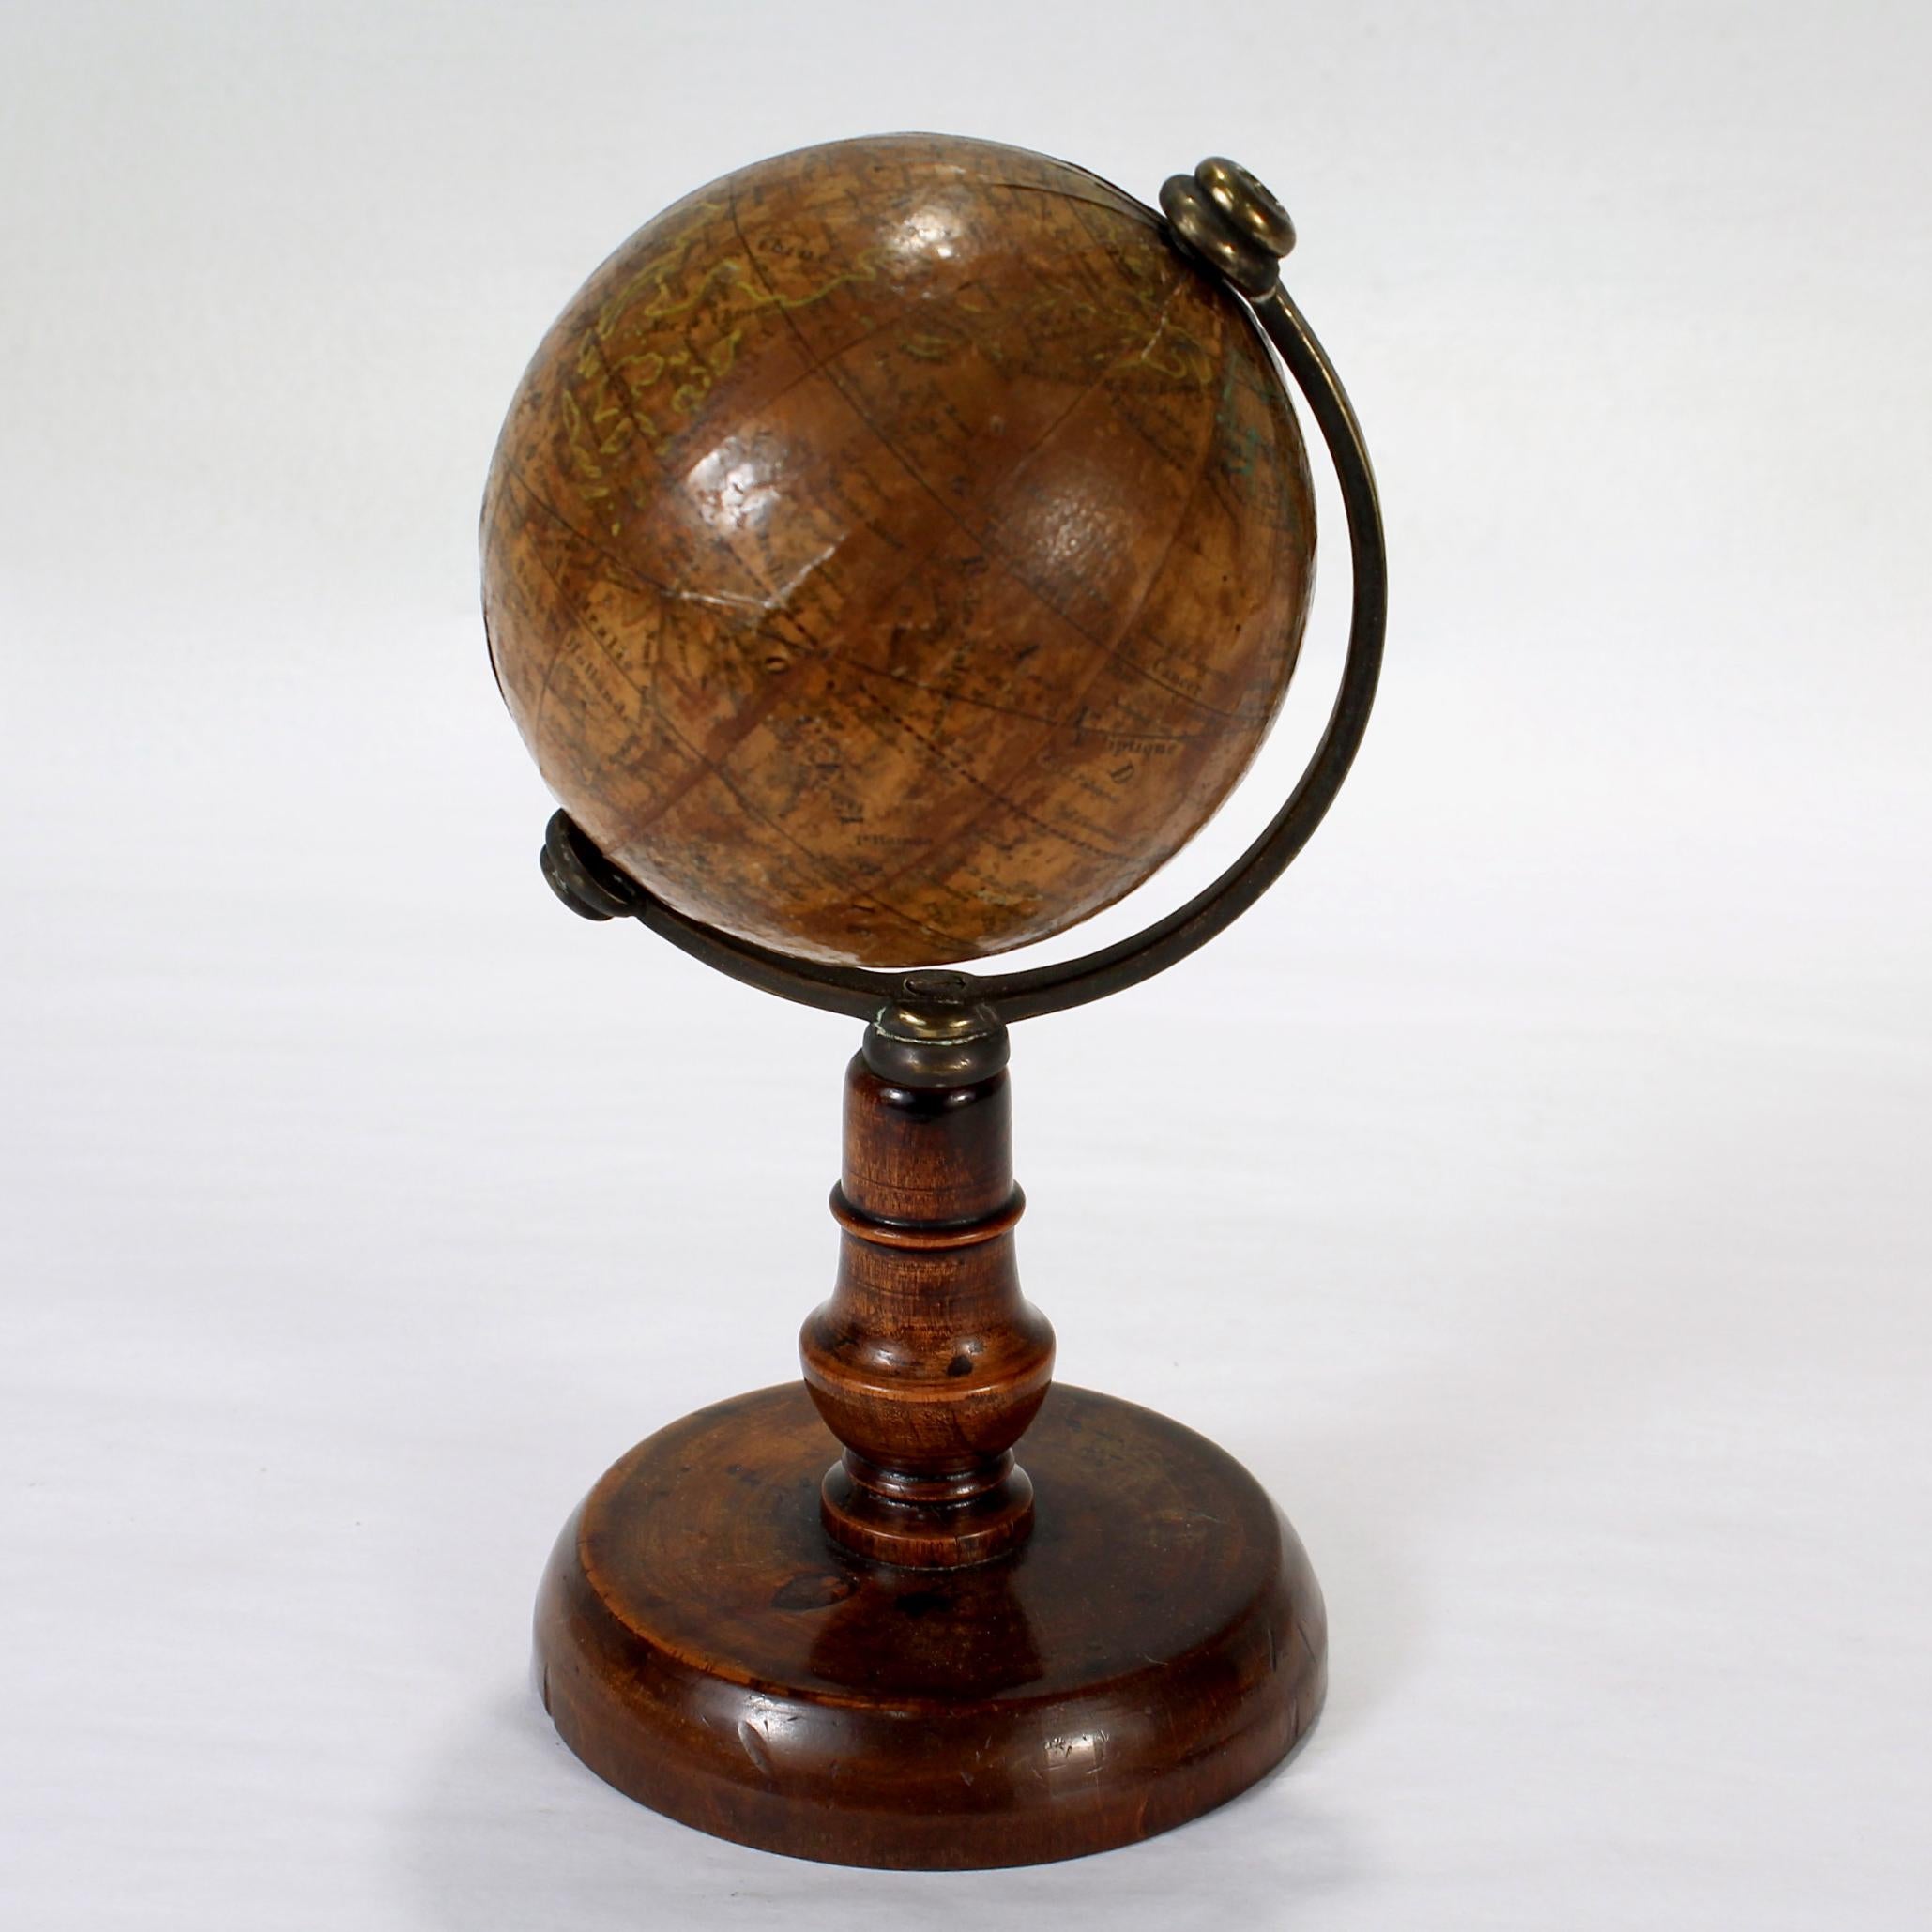 A fine antique French Edition miniature globe.

By C. Abel-Klinger.

On a turned wooden stand with an uncalibrated brass half meridian. 

The globe is marked with an integral label that read 'La Terre d'Après les plus nouvelles découvertes.